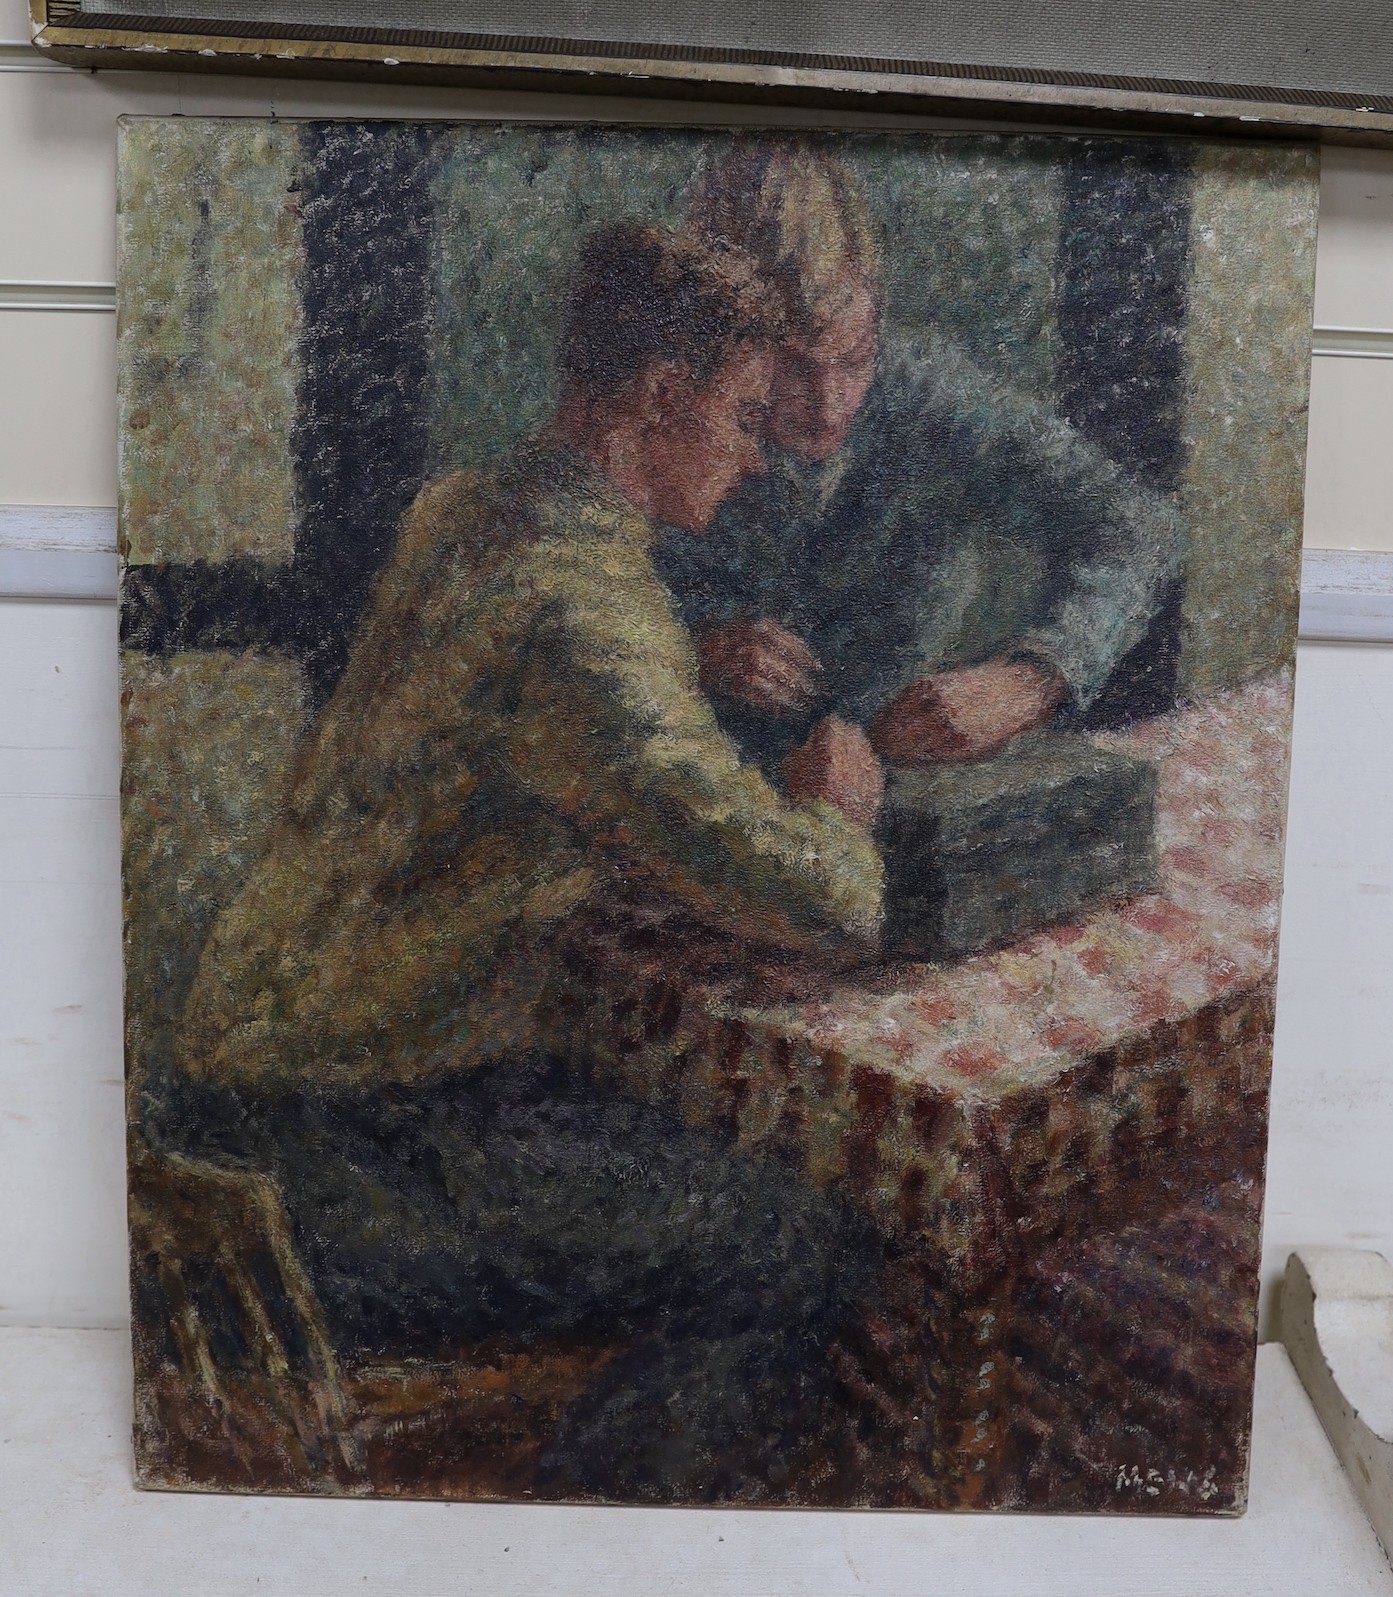 Modern British, oil on canvas, impressionist style, two boys seated at a table playing, signed Mews, unframed, 61 x 51cm